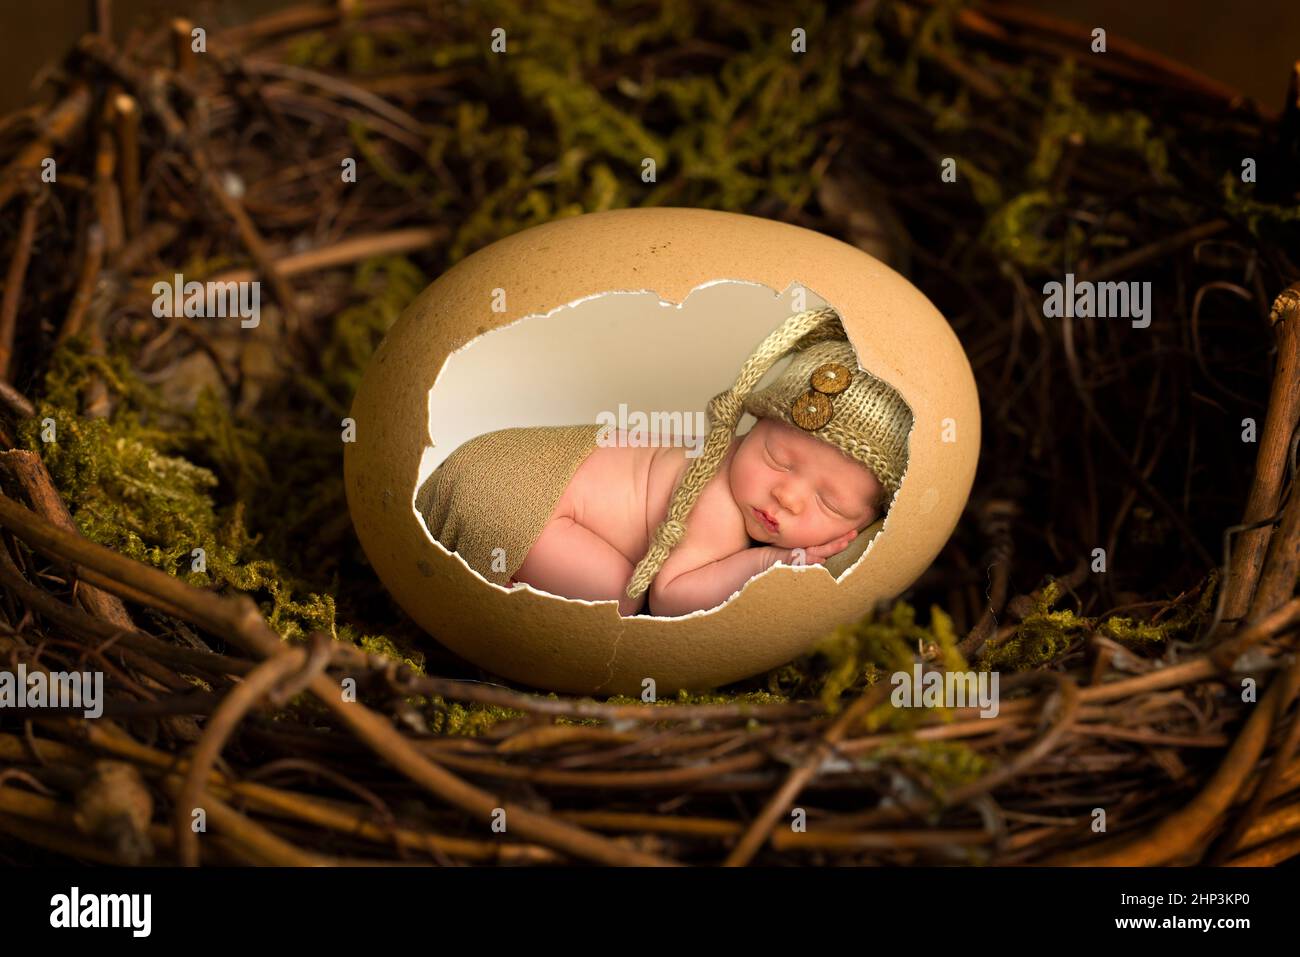 Adorable little newborn baby boy of only 11 days old sleeping inside an open brown chicken egg Stock Photo